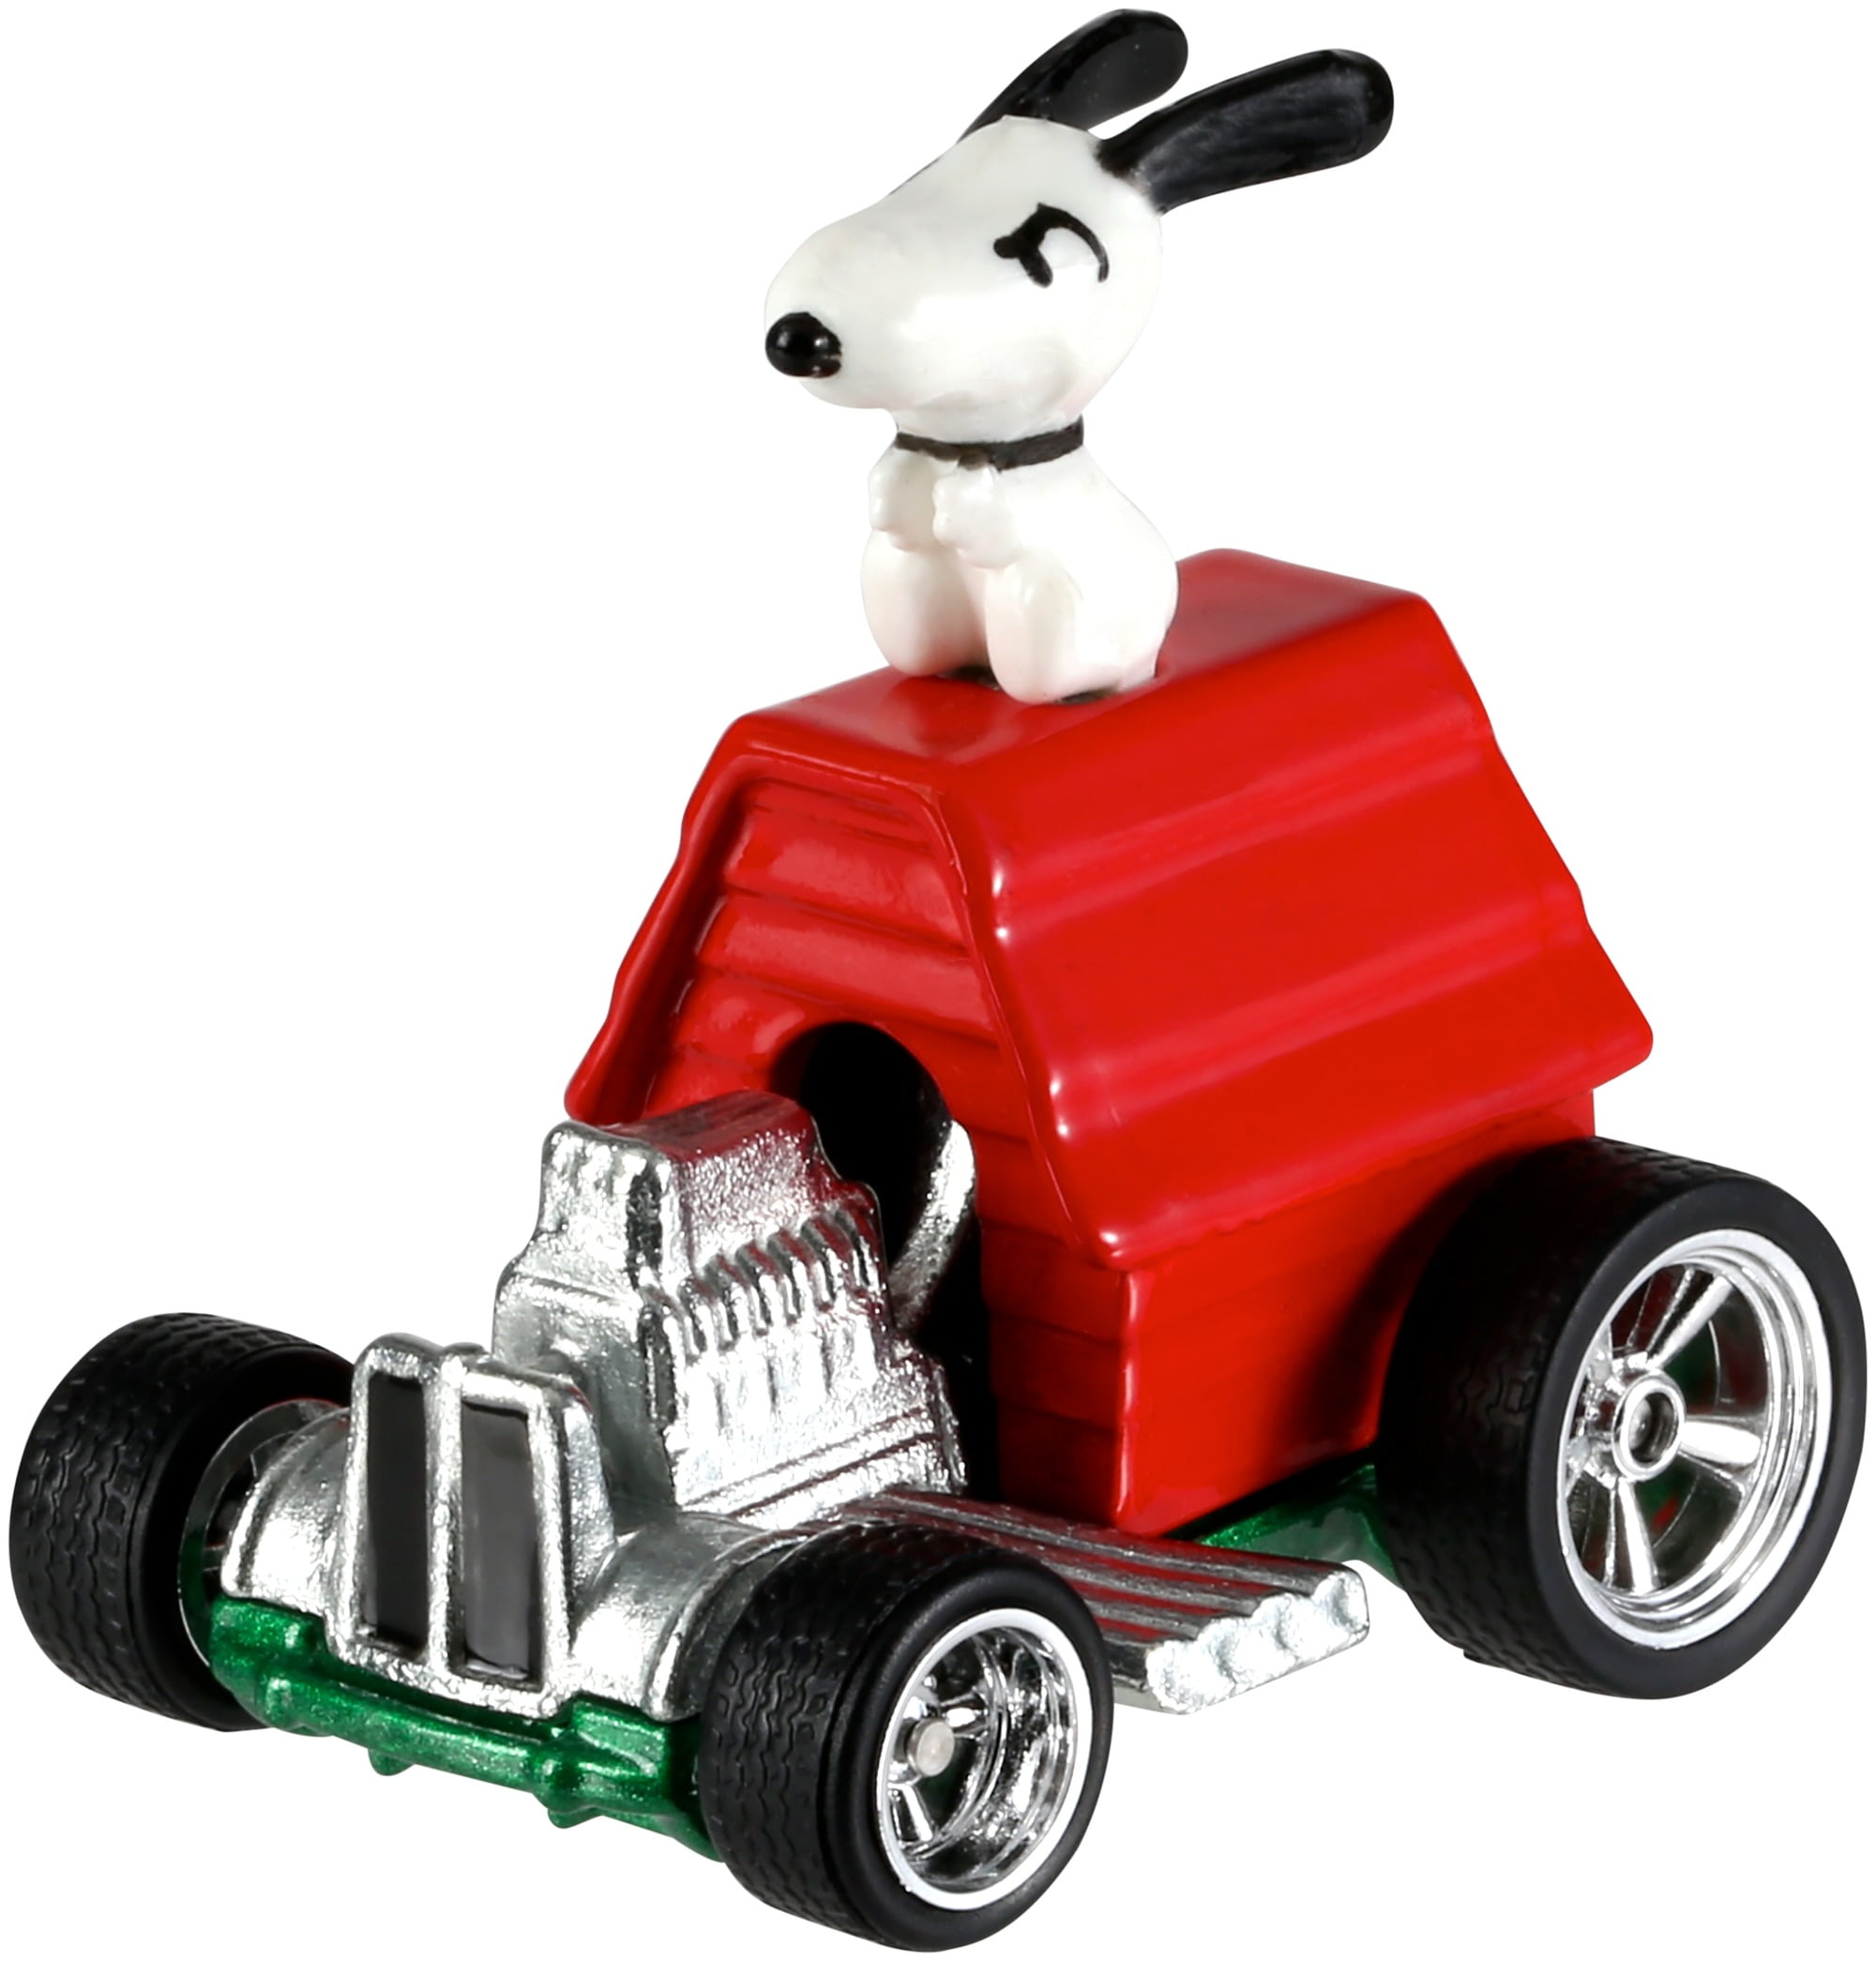 Peanuts Snoopy Car 1-64 Scale in Packet Hot Wheels DWJ89 for sale online